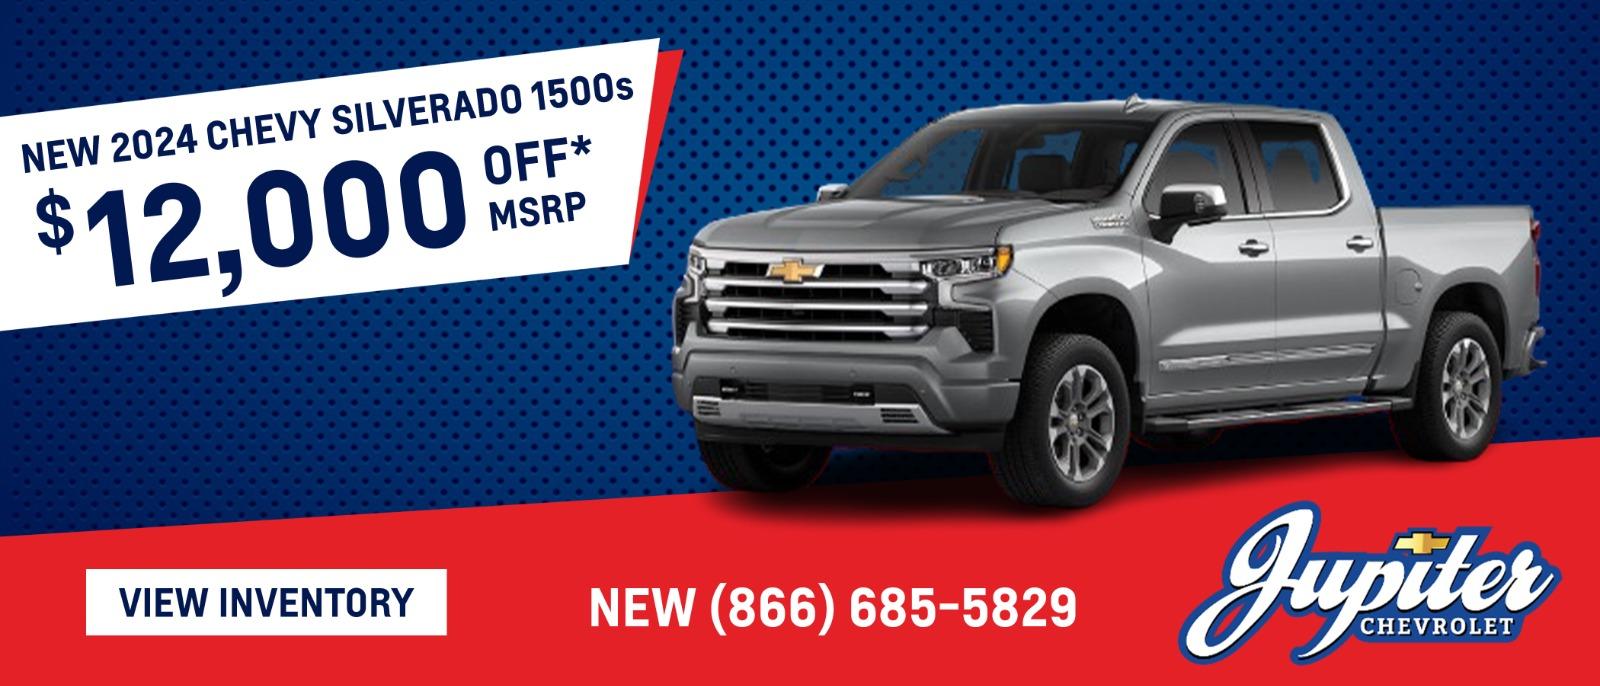 Up to $12,000 Off MSRP